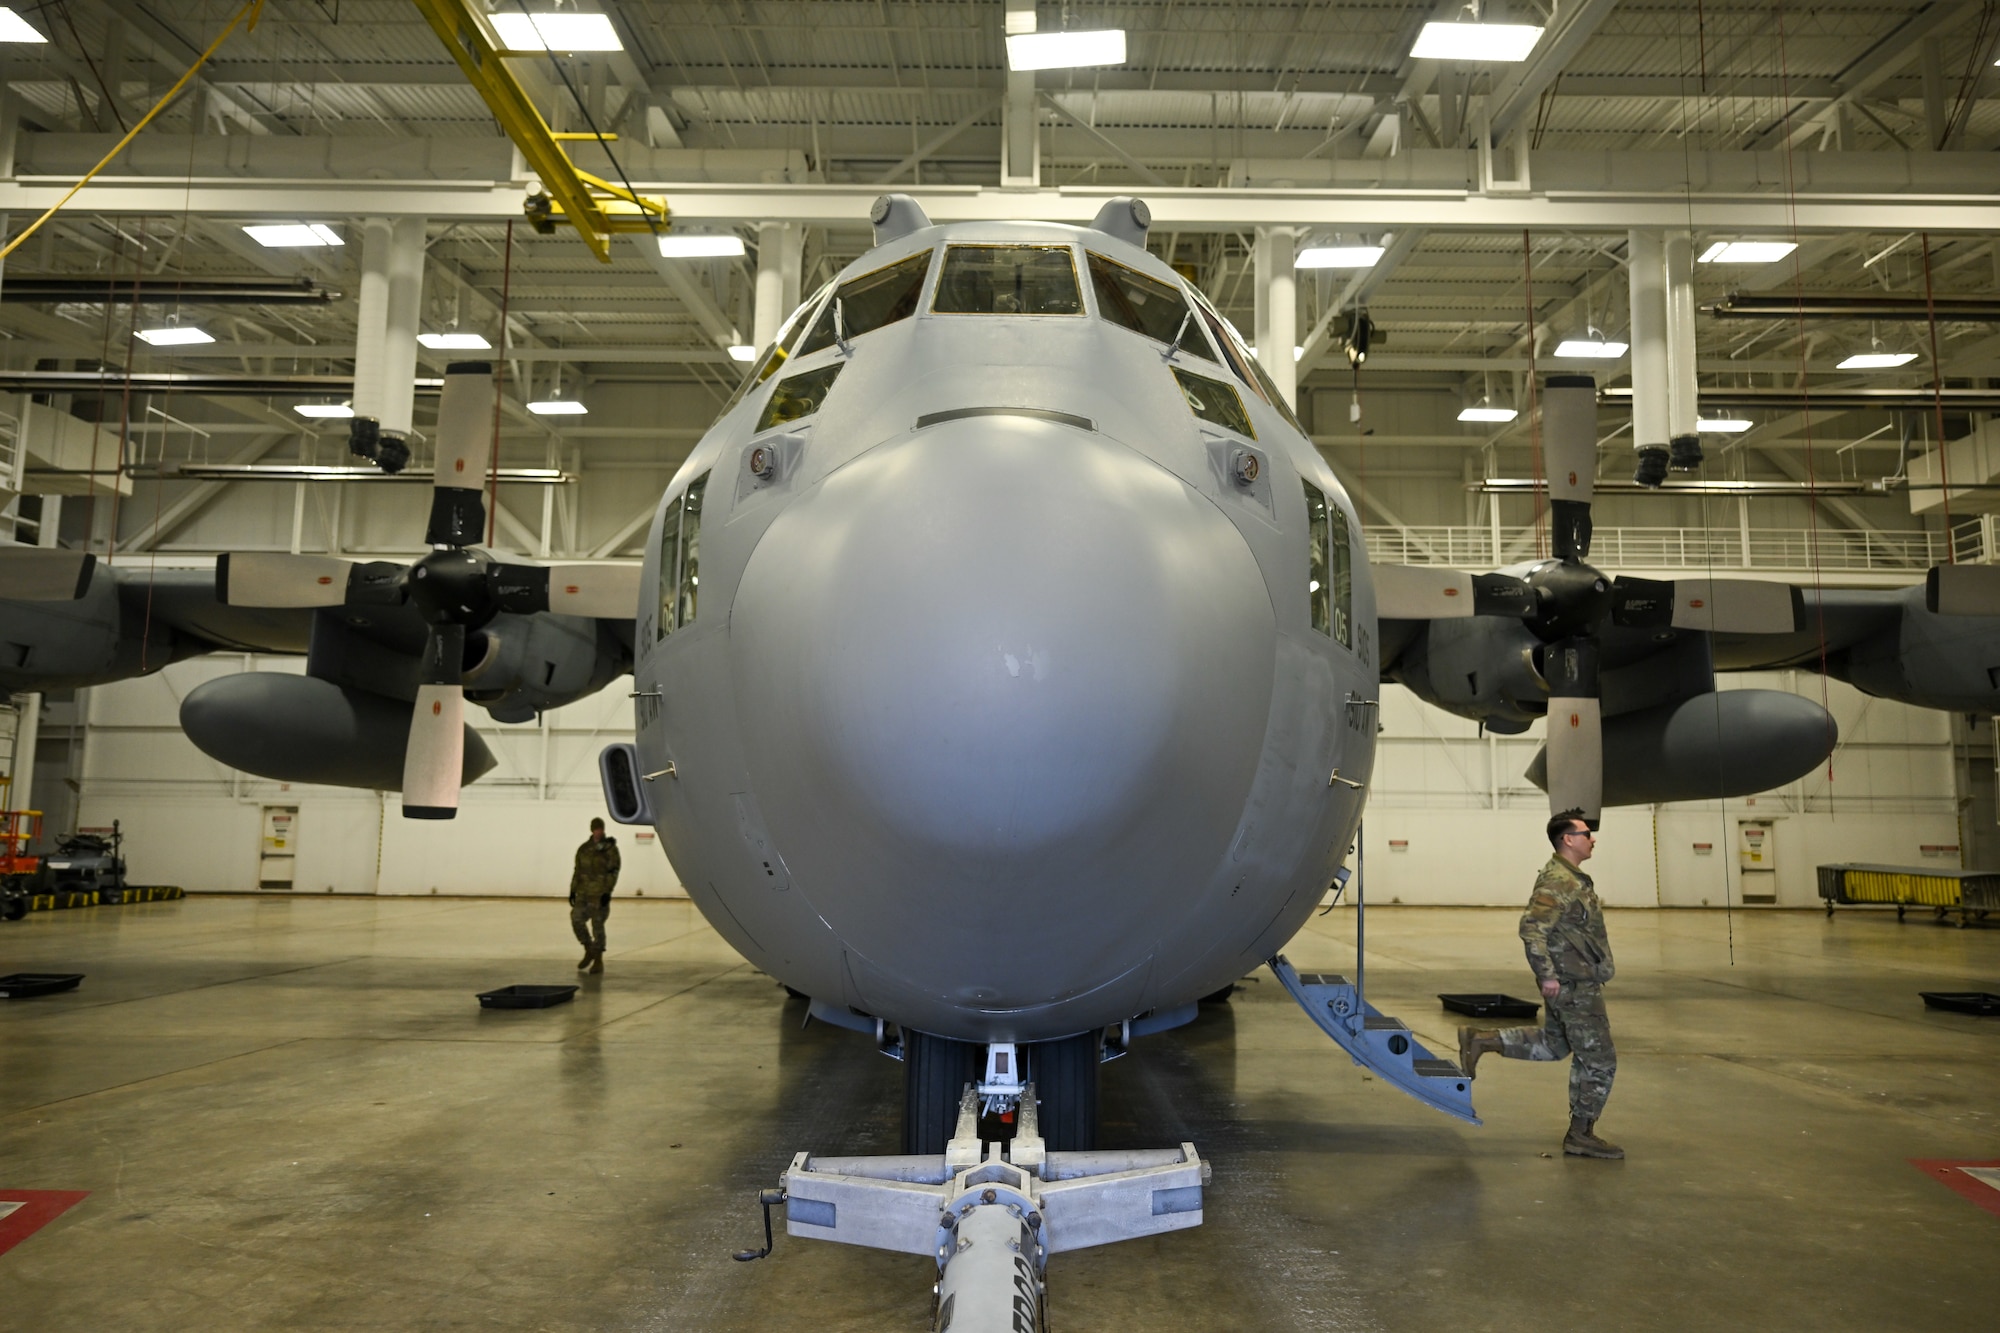 Members of the 910th Maintenance Group prepare to taxi an aircraft from a maintenance hangar to a parking spot on the aircraft ramp to begin pre-flight preparations, Jan. 31, 2024, at Youngstown Air Reserve Station, Ohio.